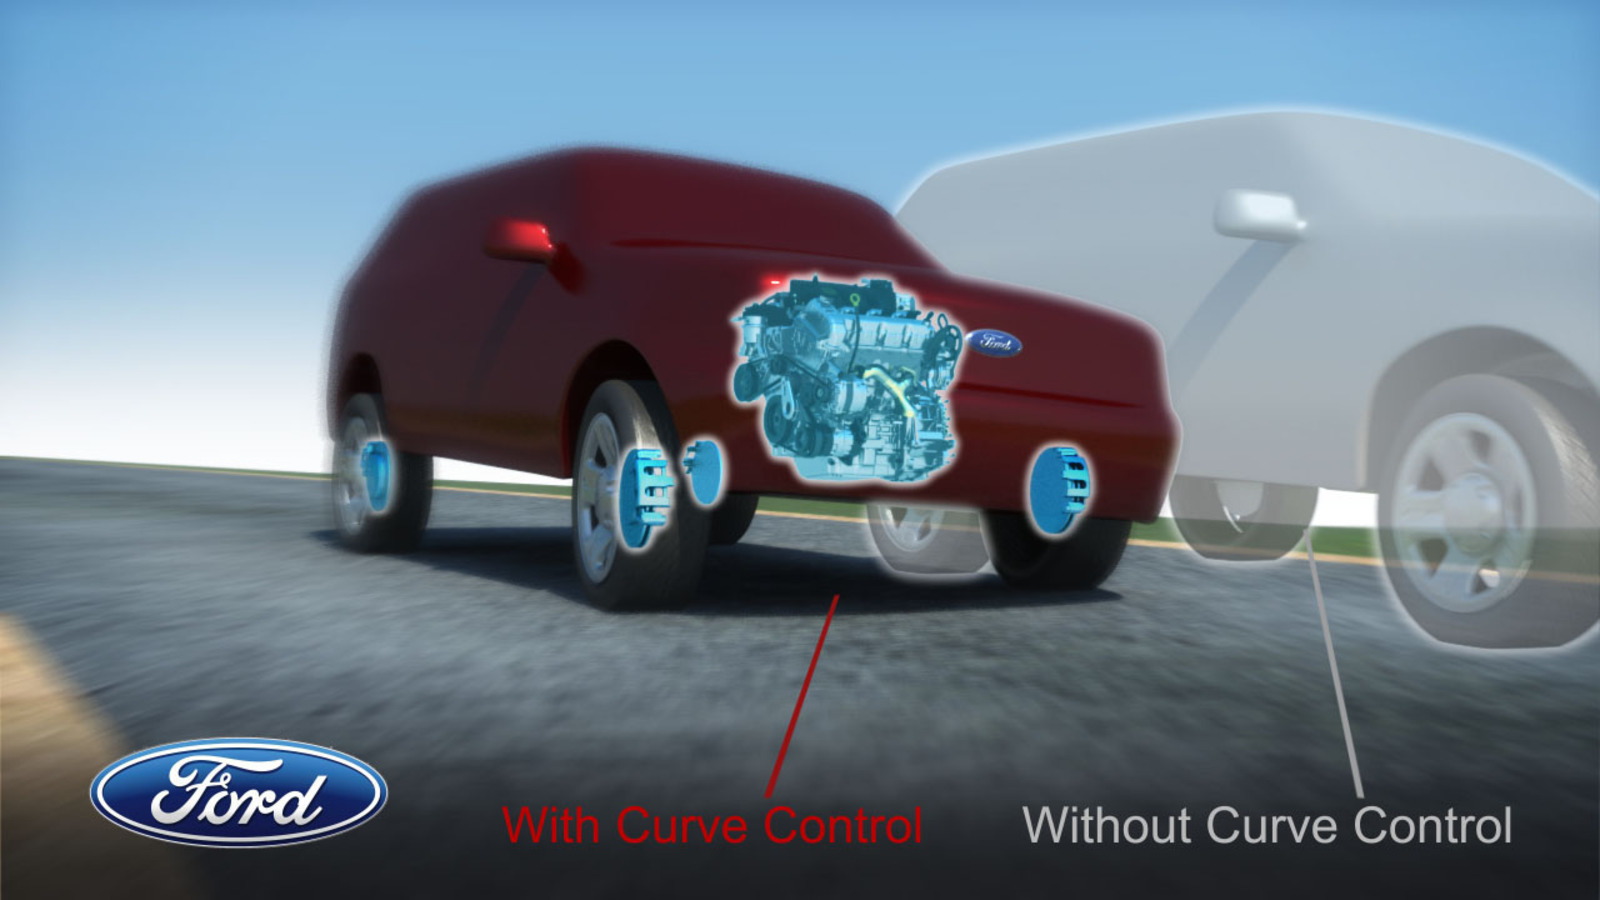 Ford's Curve Control system